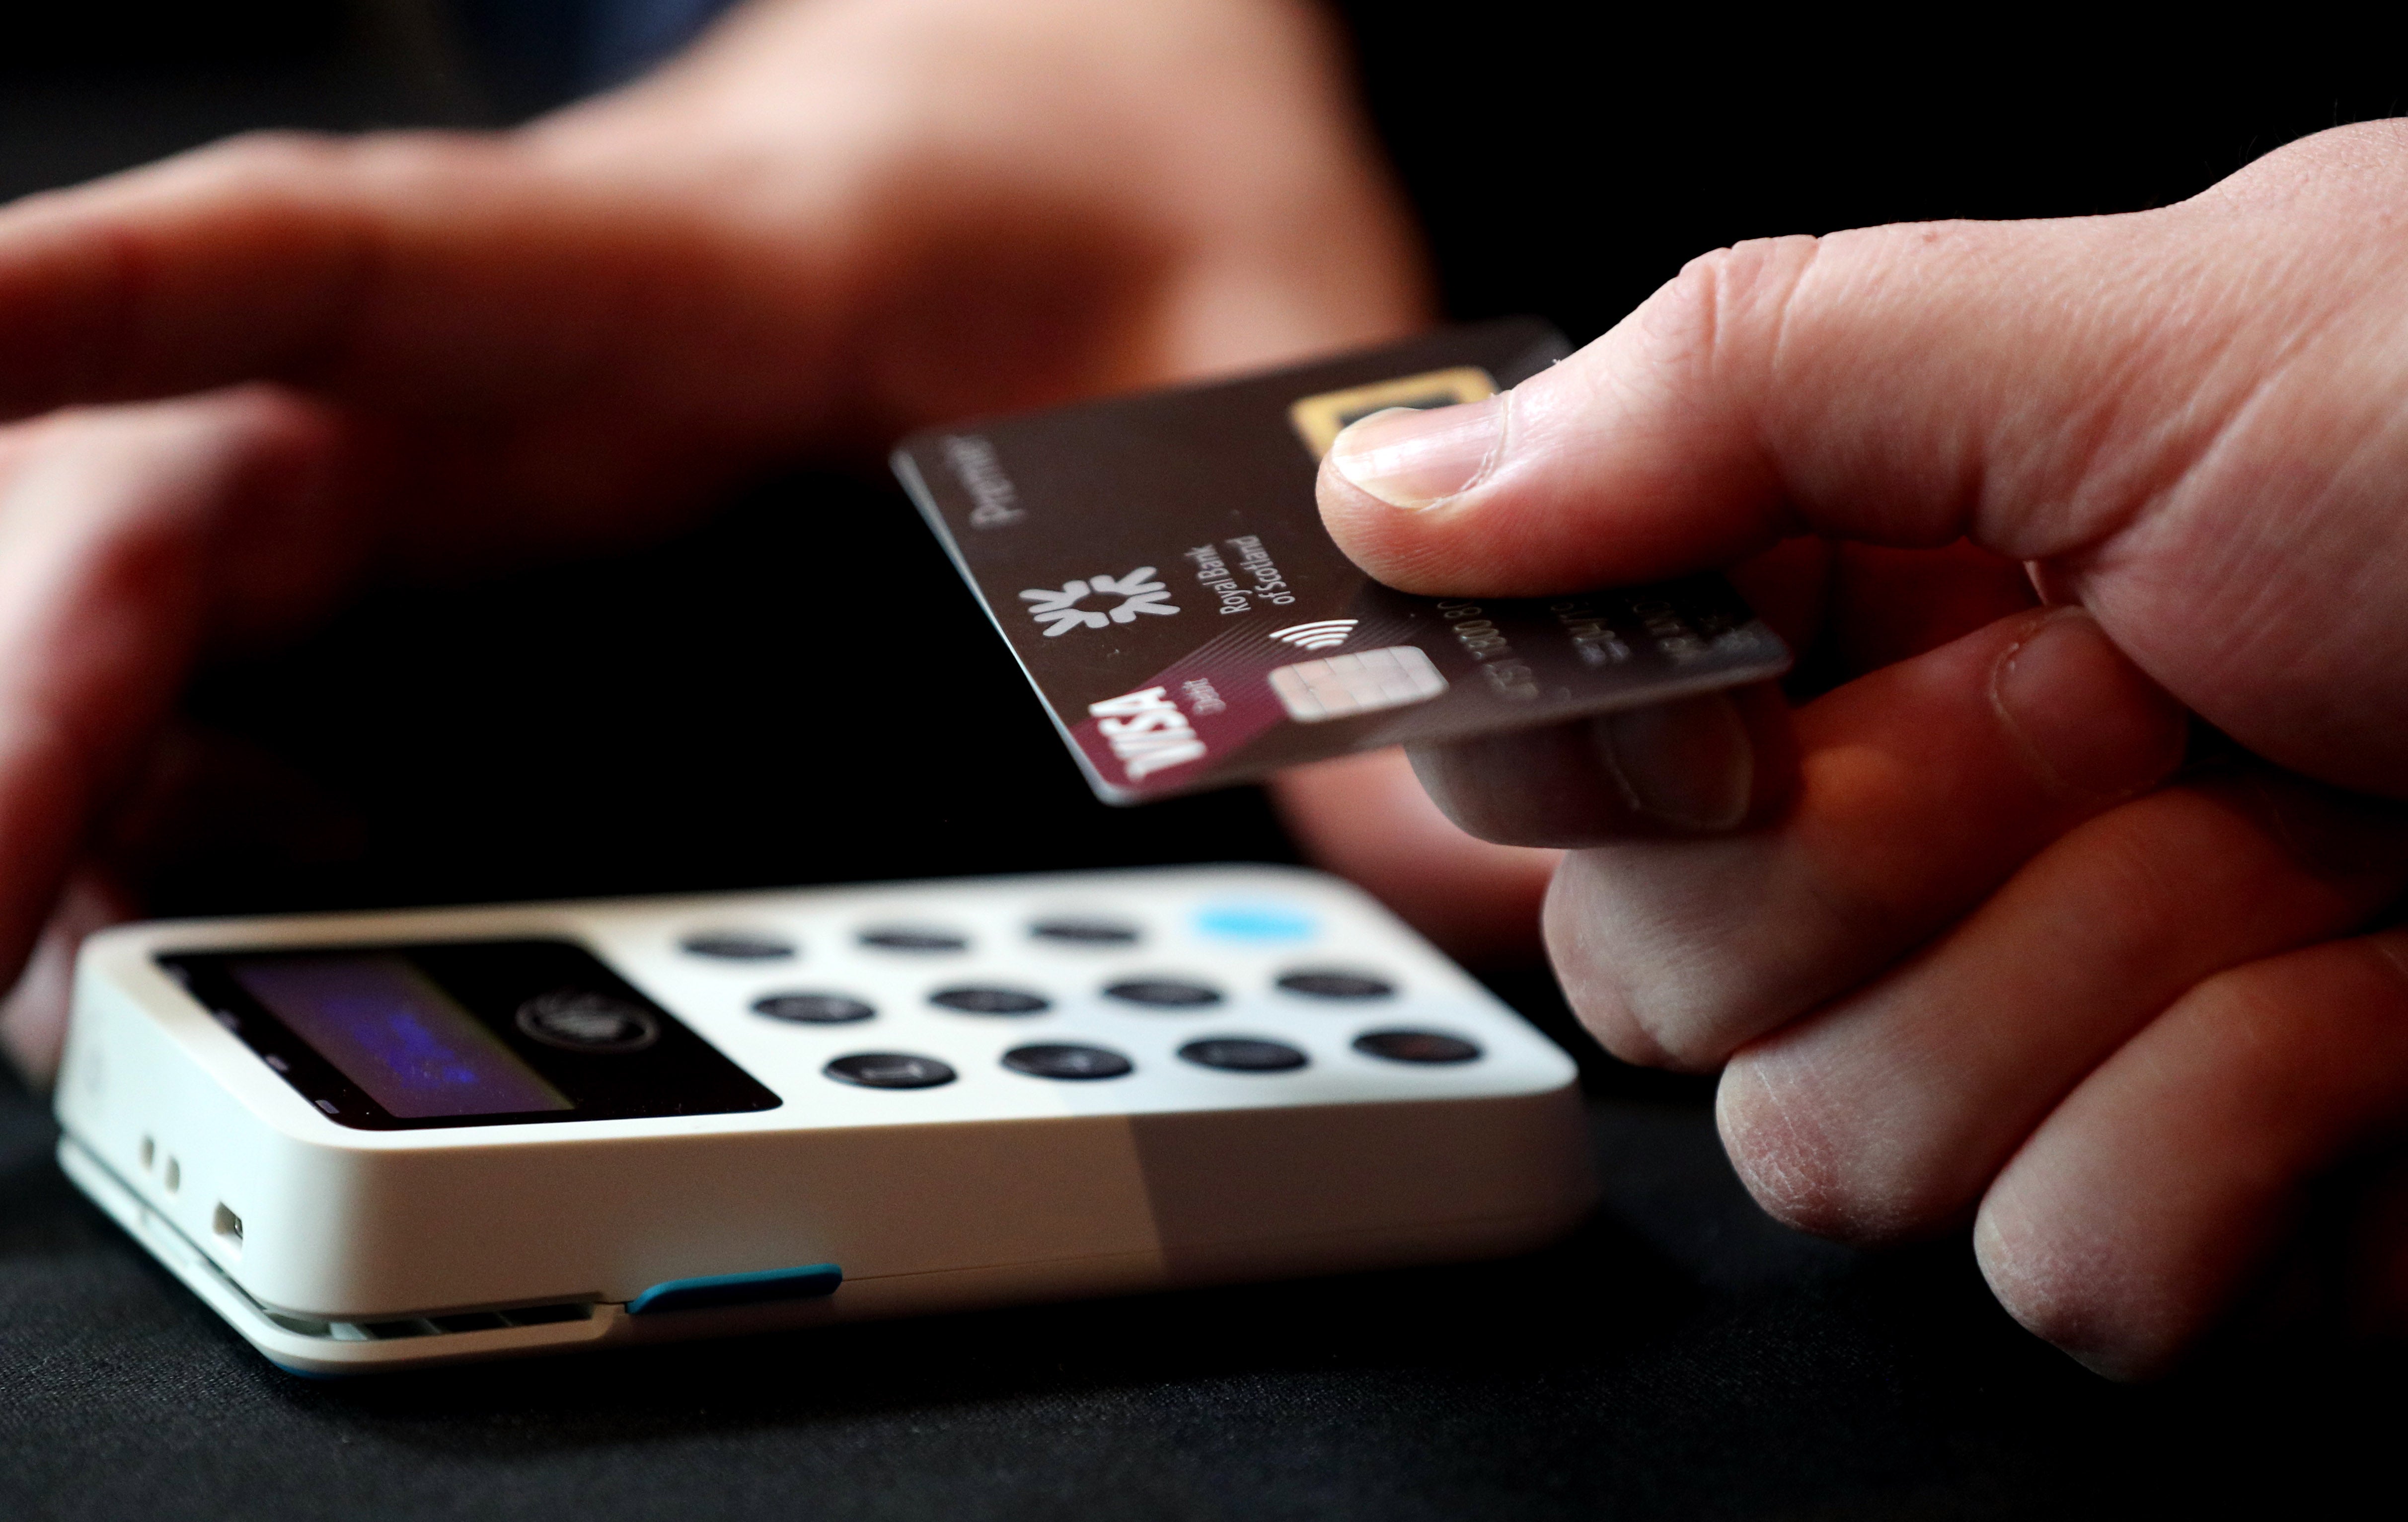 Contactless payments were first capped at £10 in 2007. (Jonathan Brady/PA)